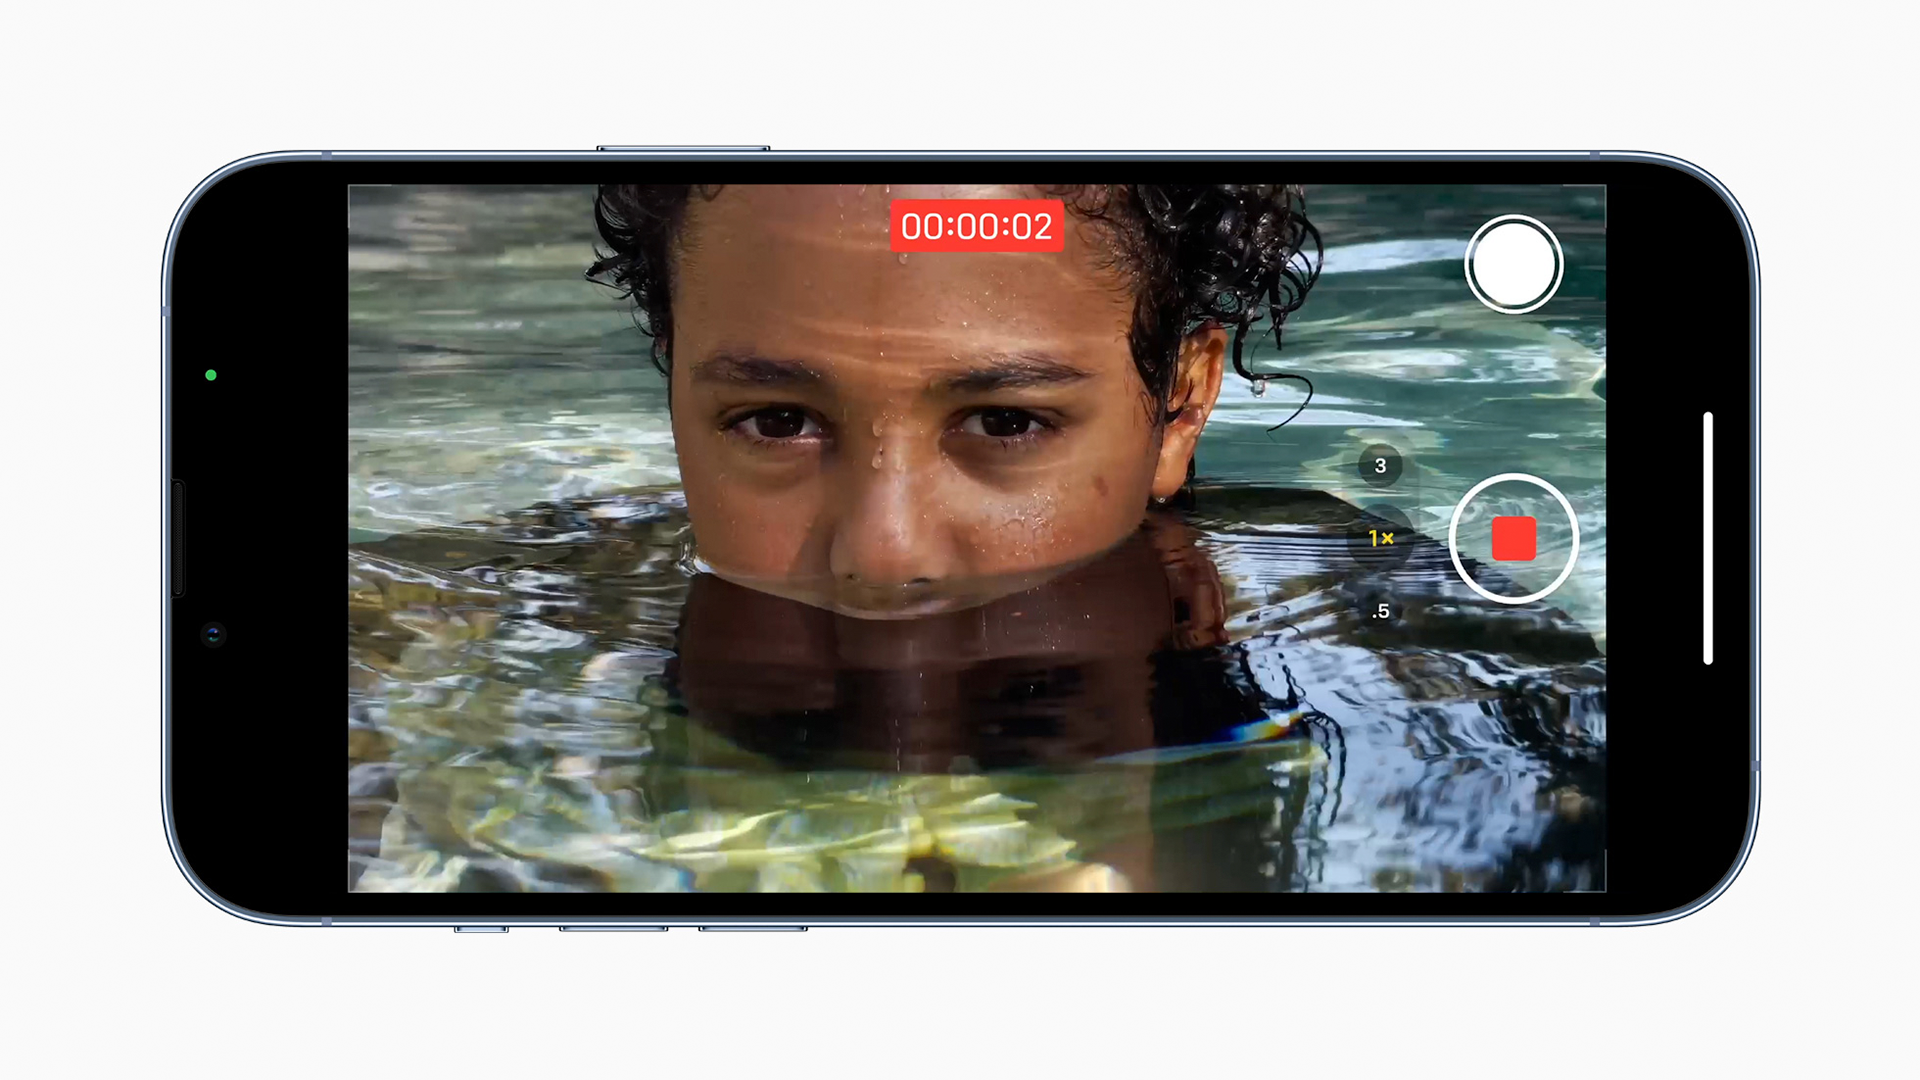 The iPhone 13 Pro recording 4K video.